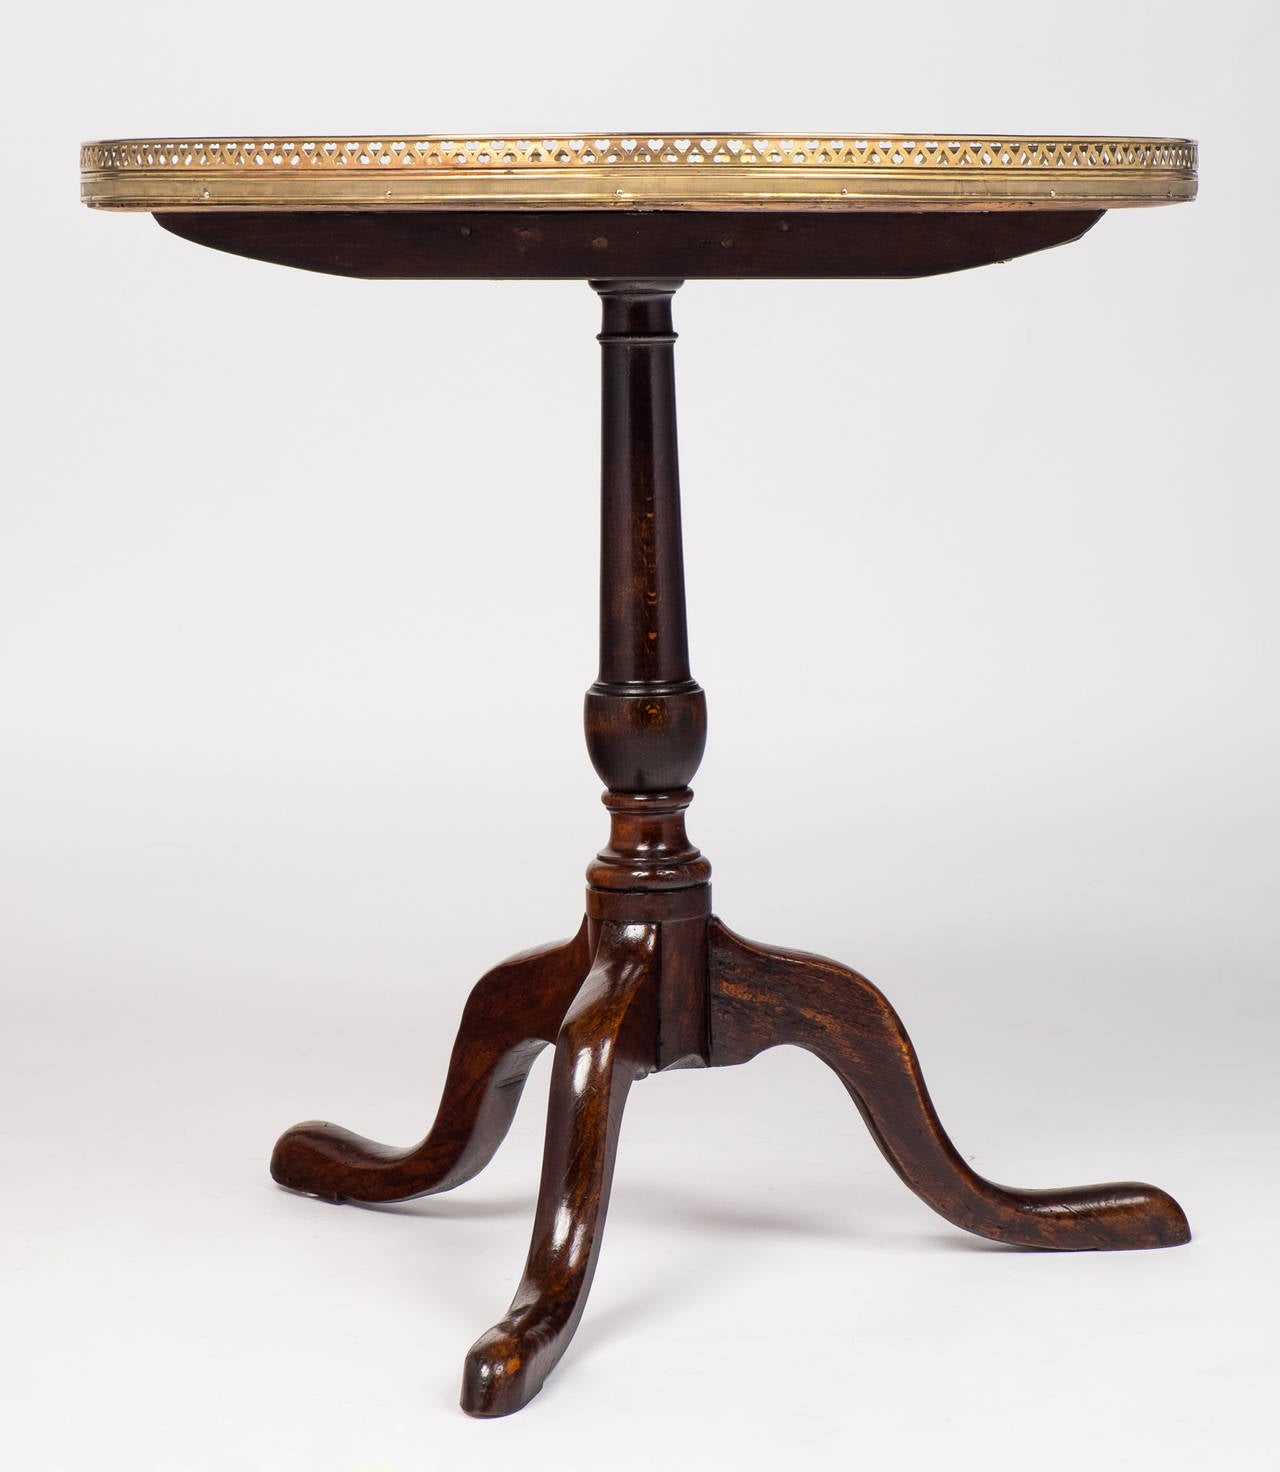 Late 18th Century French Louis XVI Marble-Top Pedestal Table